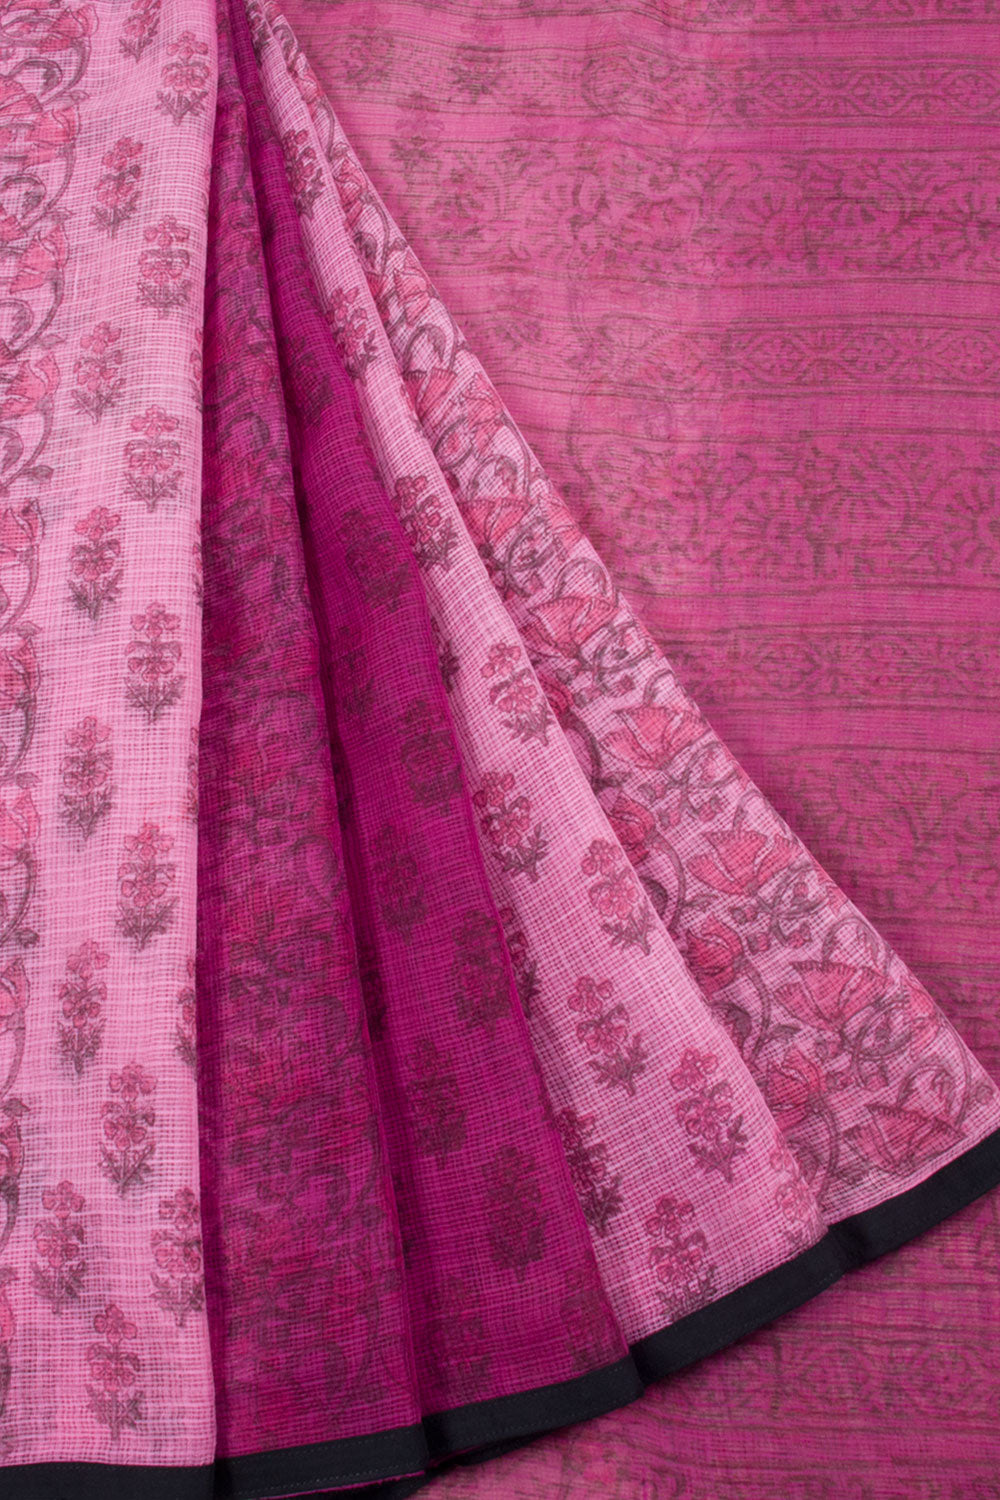 Pink Hand Block Printed Kota Cotton Saree with Allover Floral Design, Floral Pallu and Fancy Tassels without Blouse